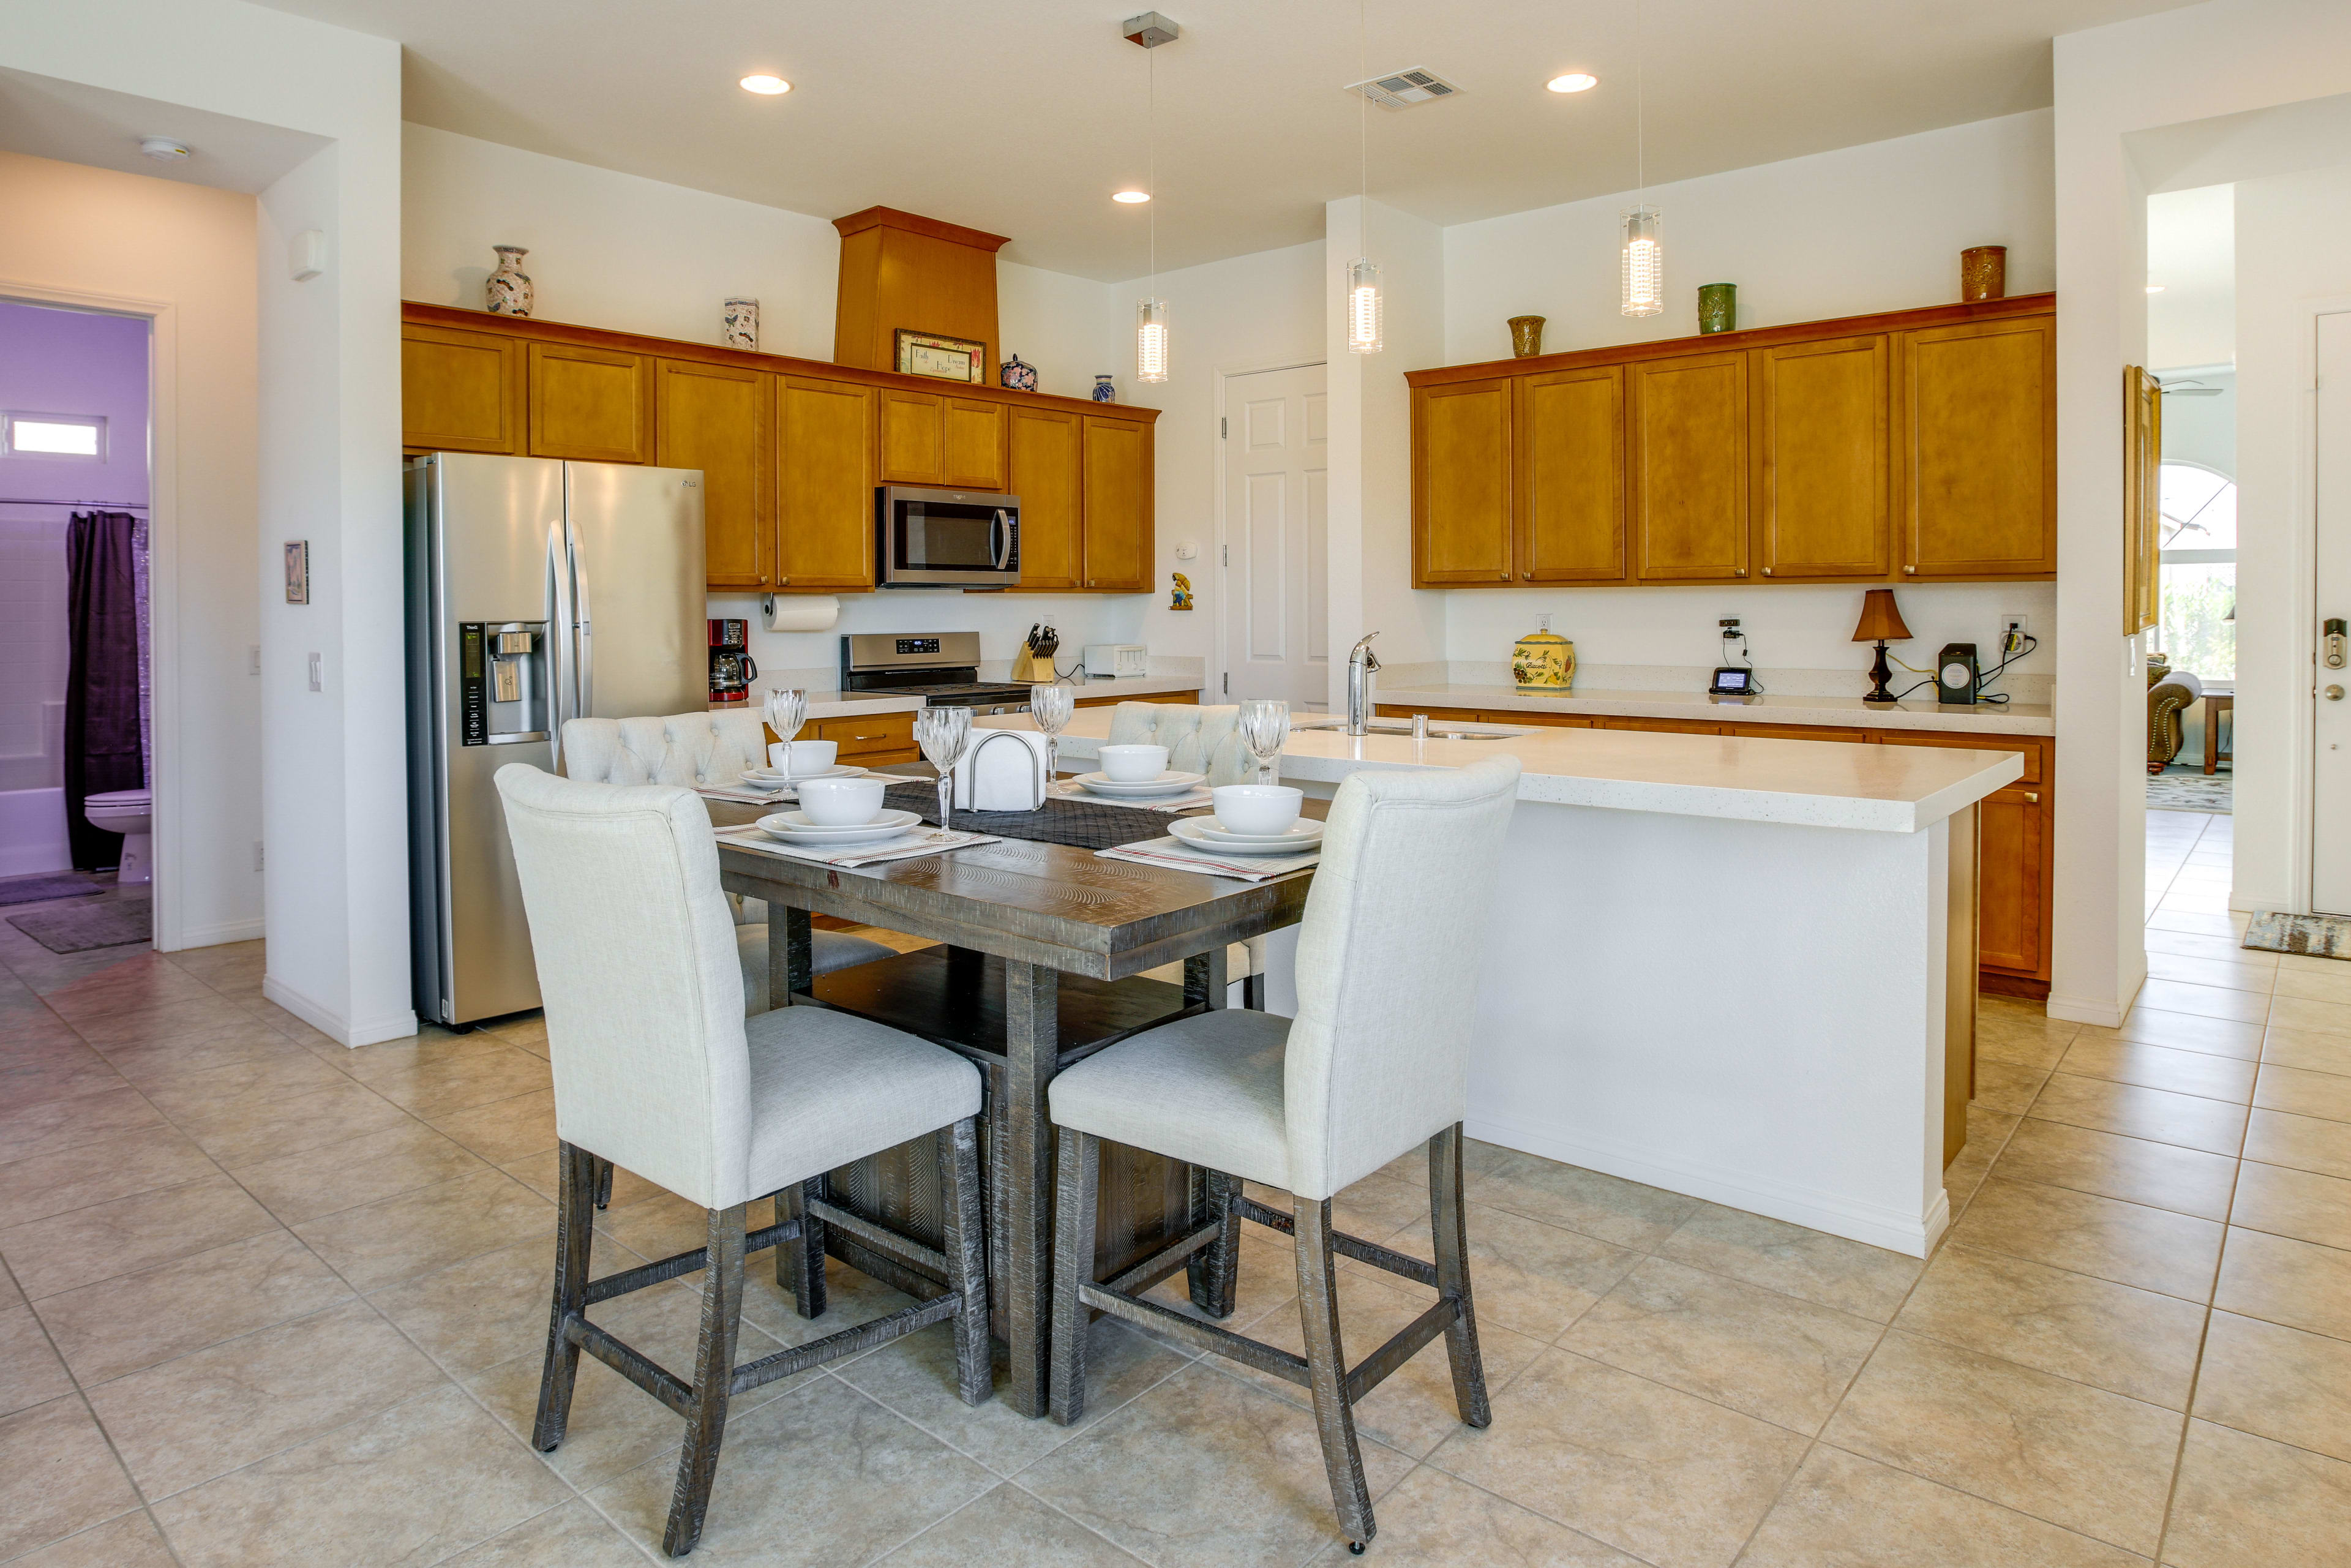 Dining Area | Central A/C & Heating | Pet Friendly w/ Fee